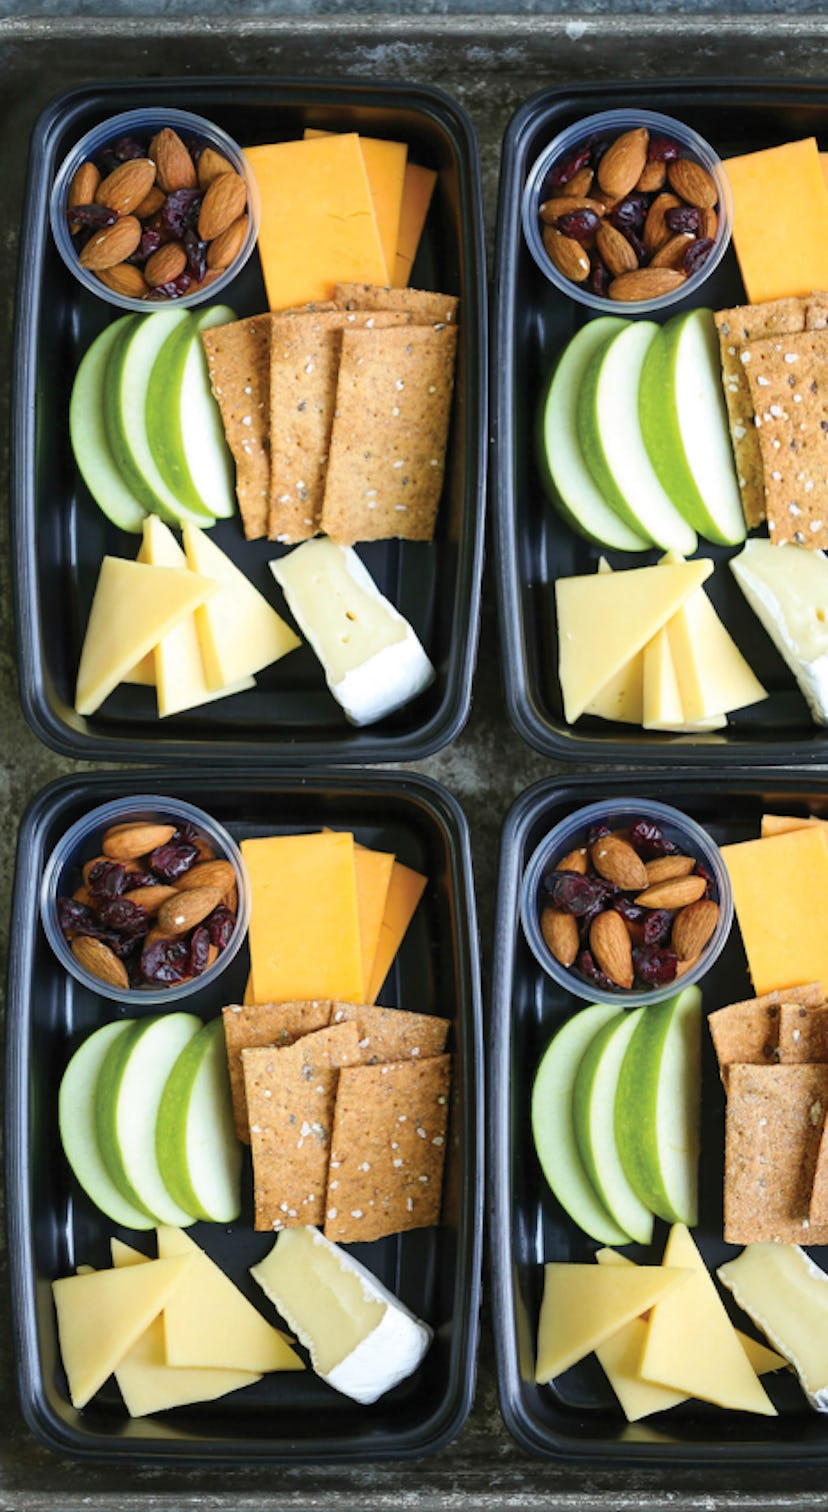 One of the best make-ahead breakfasts for busy sports mornings is cheese and fruit bistro boxes.